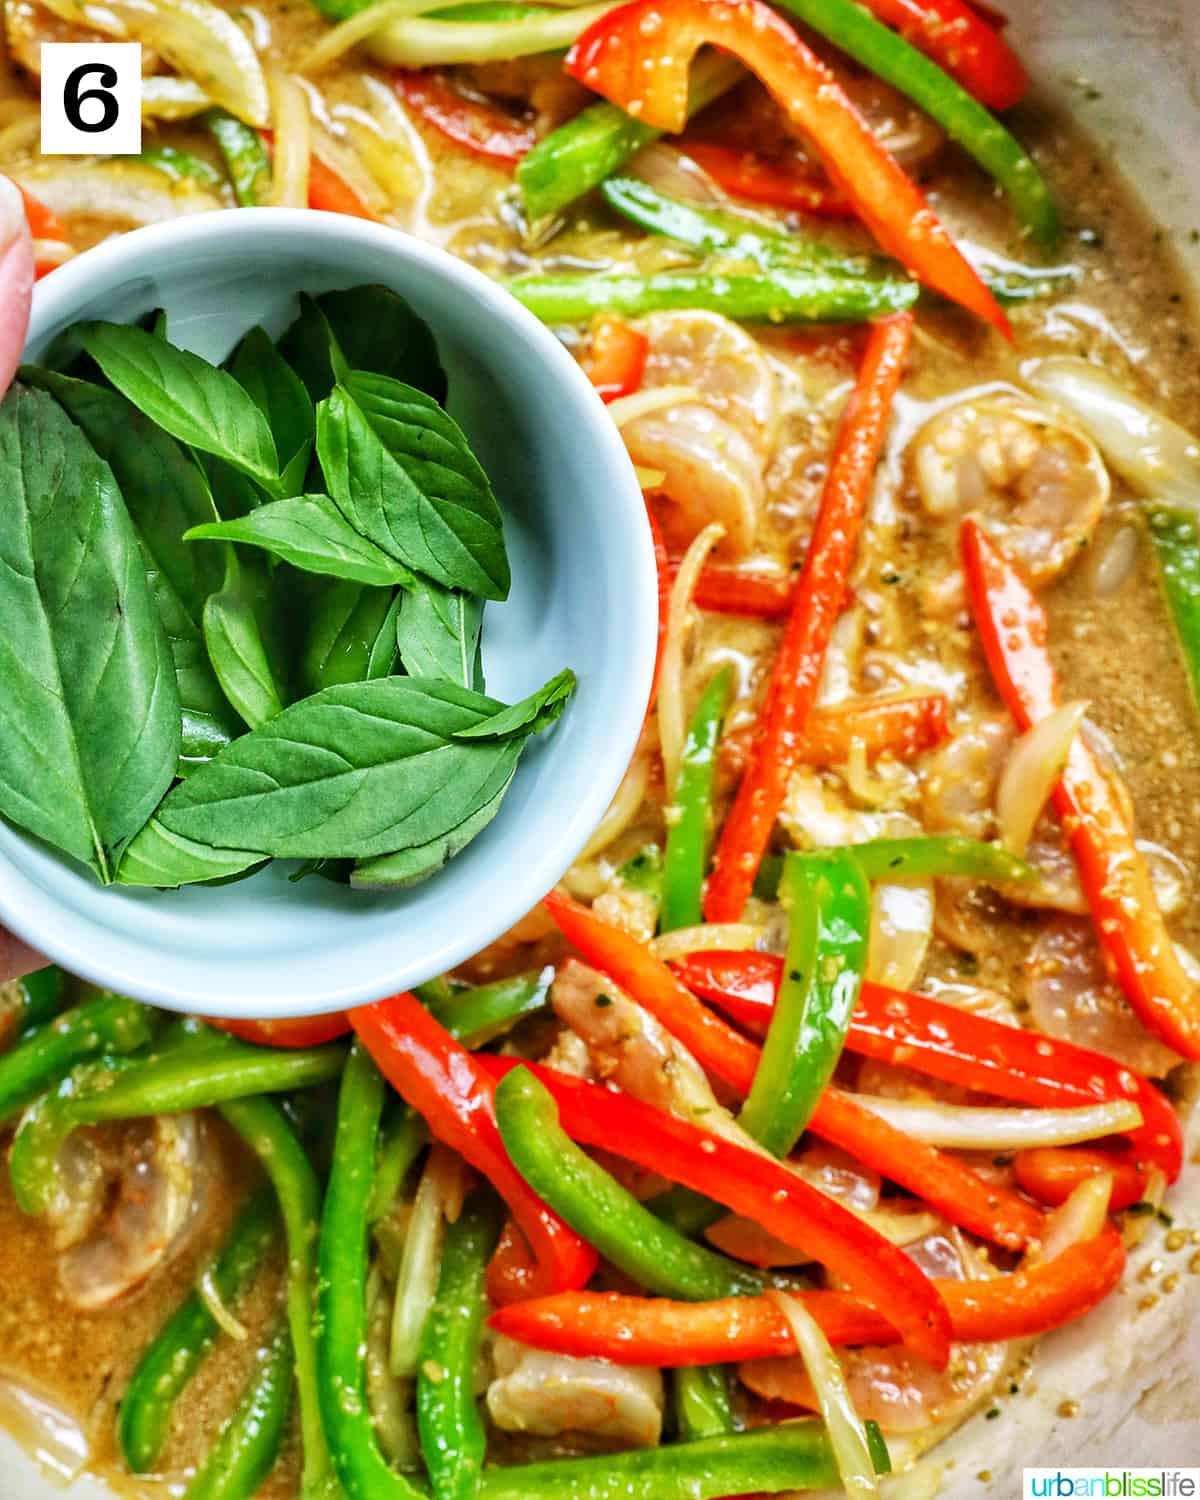 bowl of Thai basil leaves over sliced onions, red peppers, and green peppers in a saucepan.